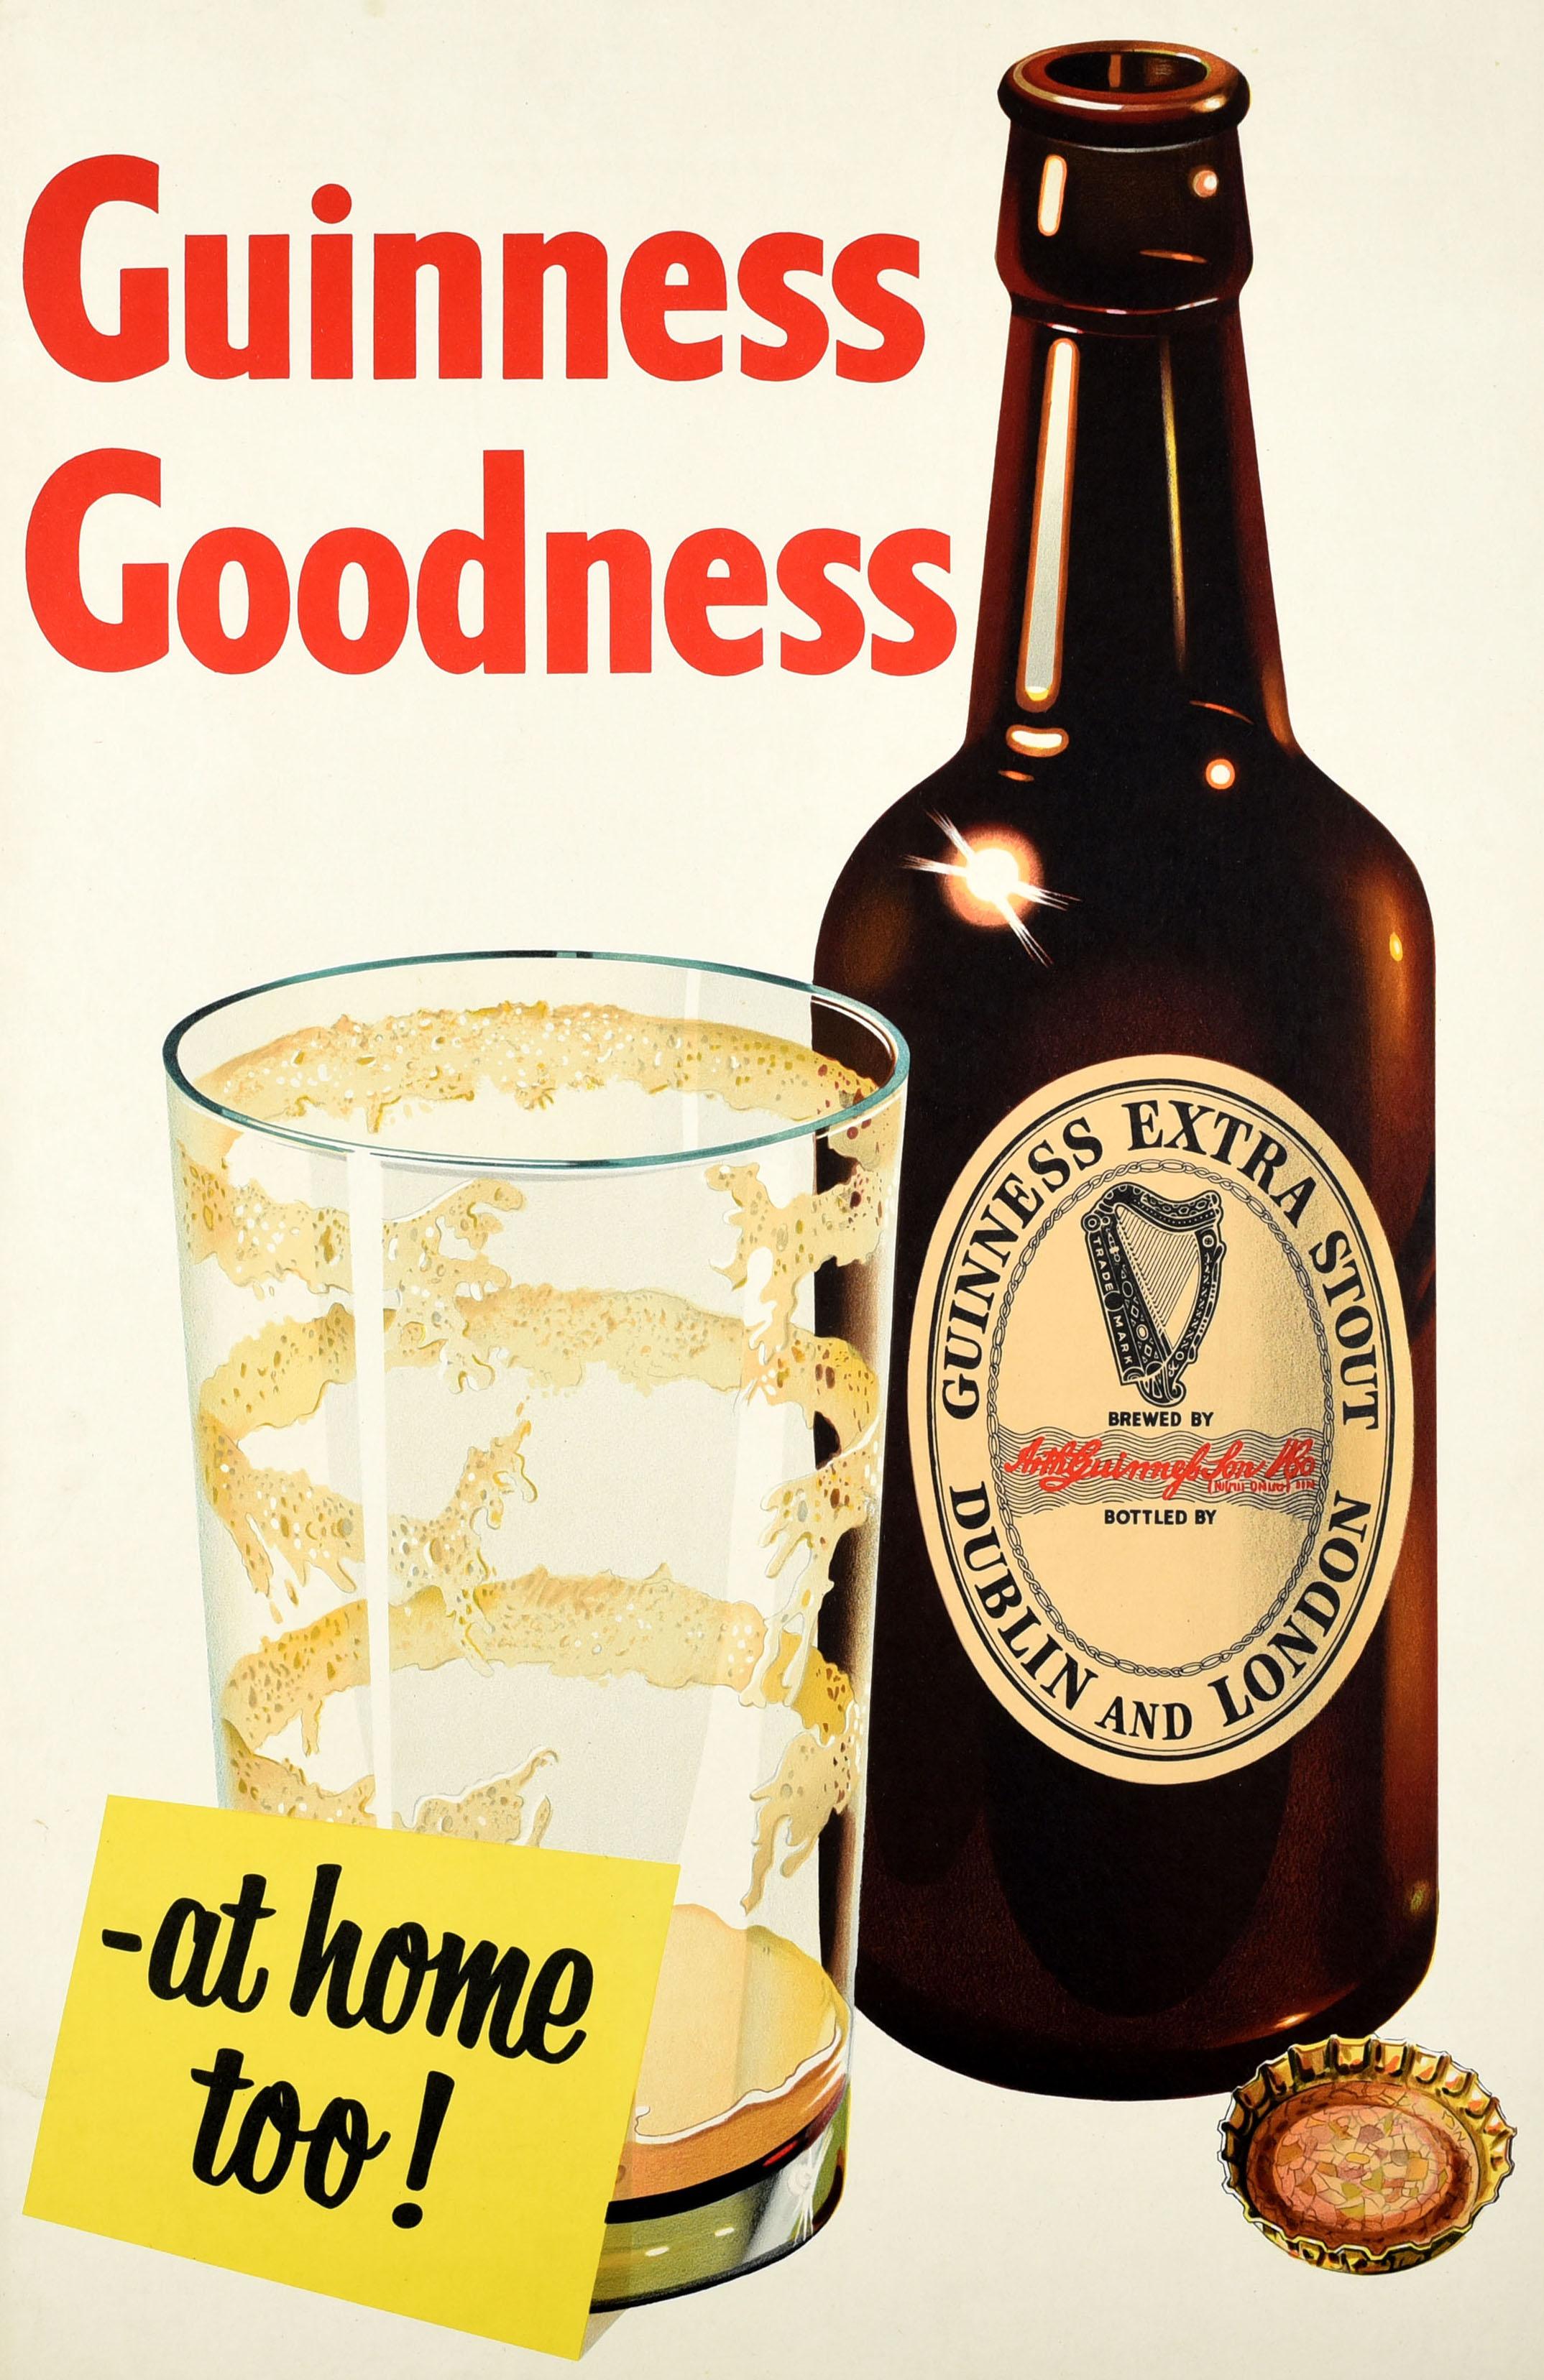 Original vintage advertising poster for the iconic drink Guinness Irish stout beer - Guinness Goodness At Home Too! Great design to promote Guinness in bottles that can be enjoyed at home, not just at the pub, depicting an open bottle of Guinness